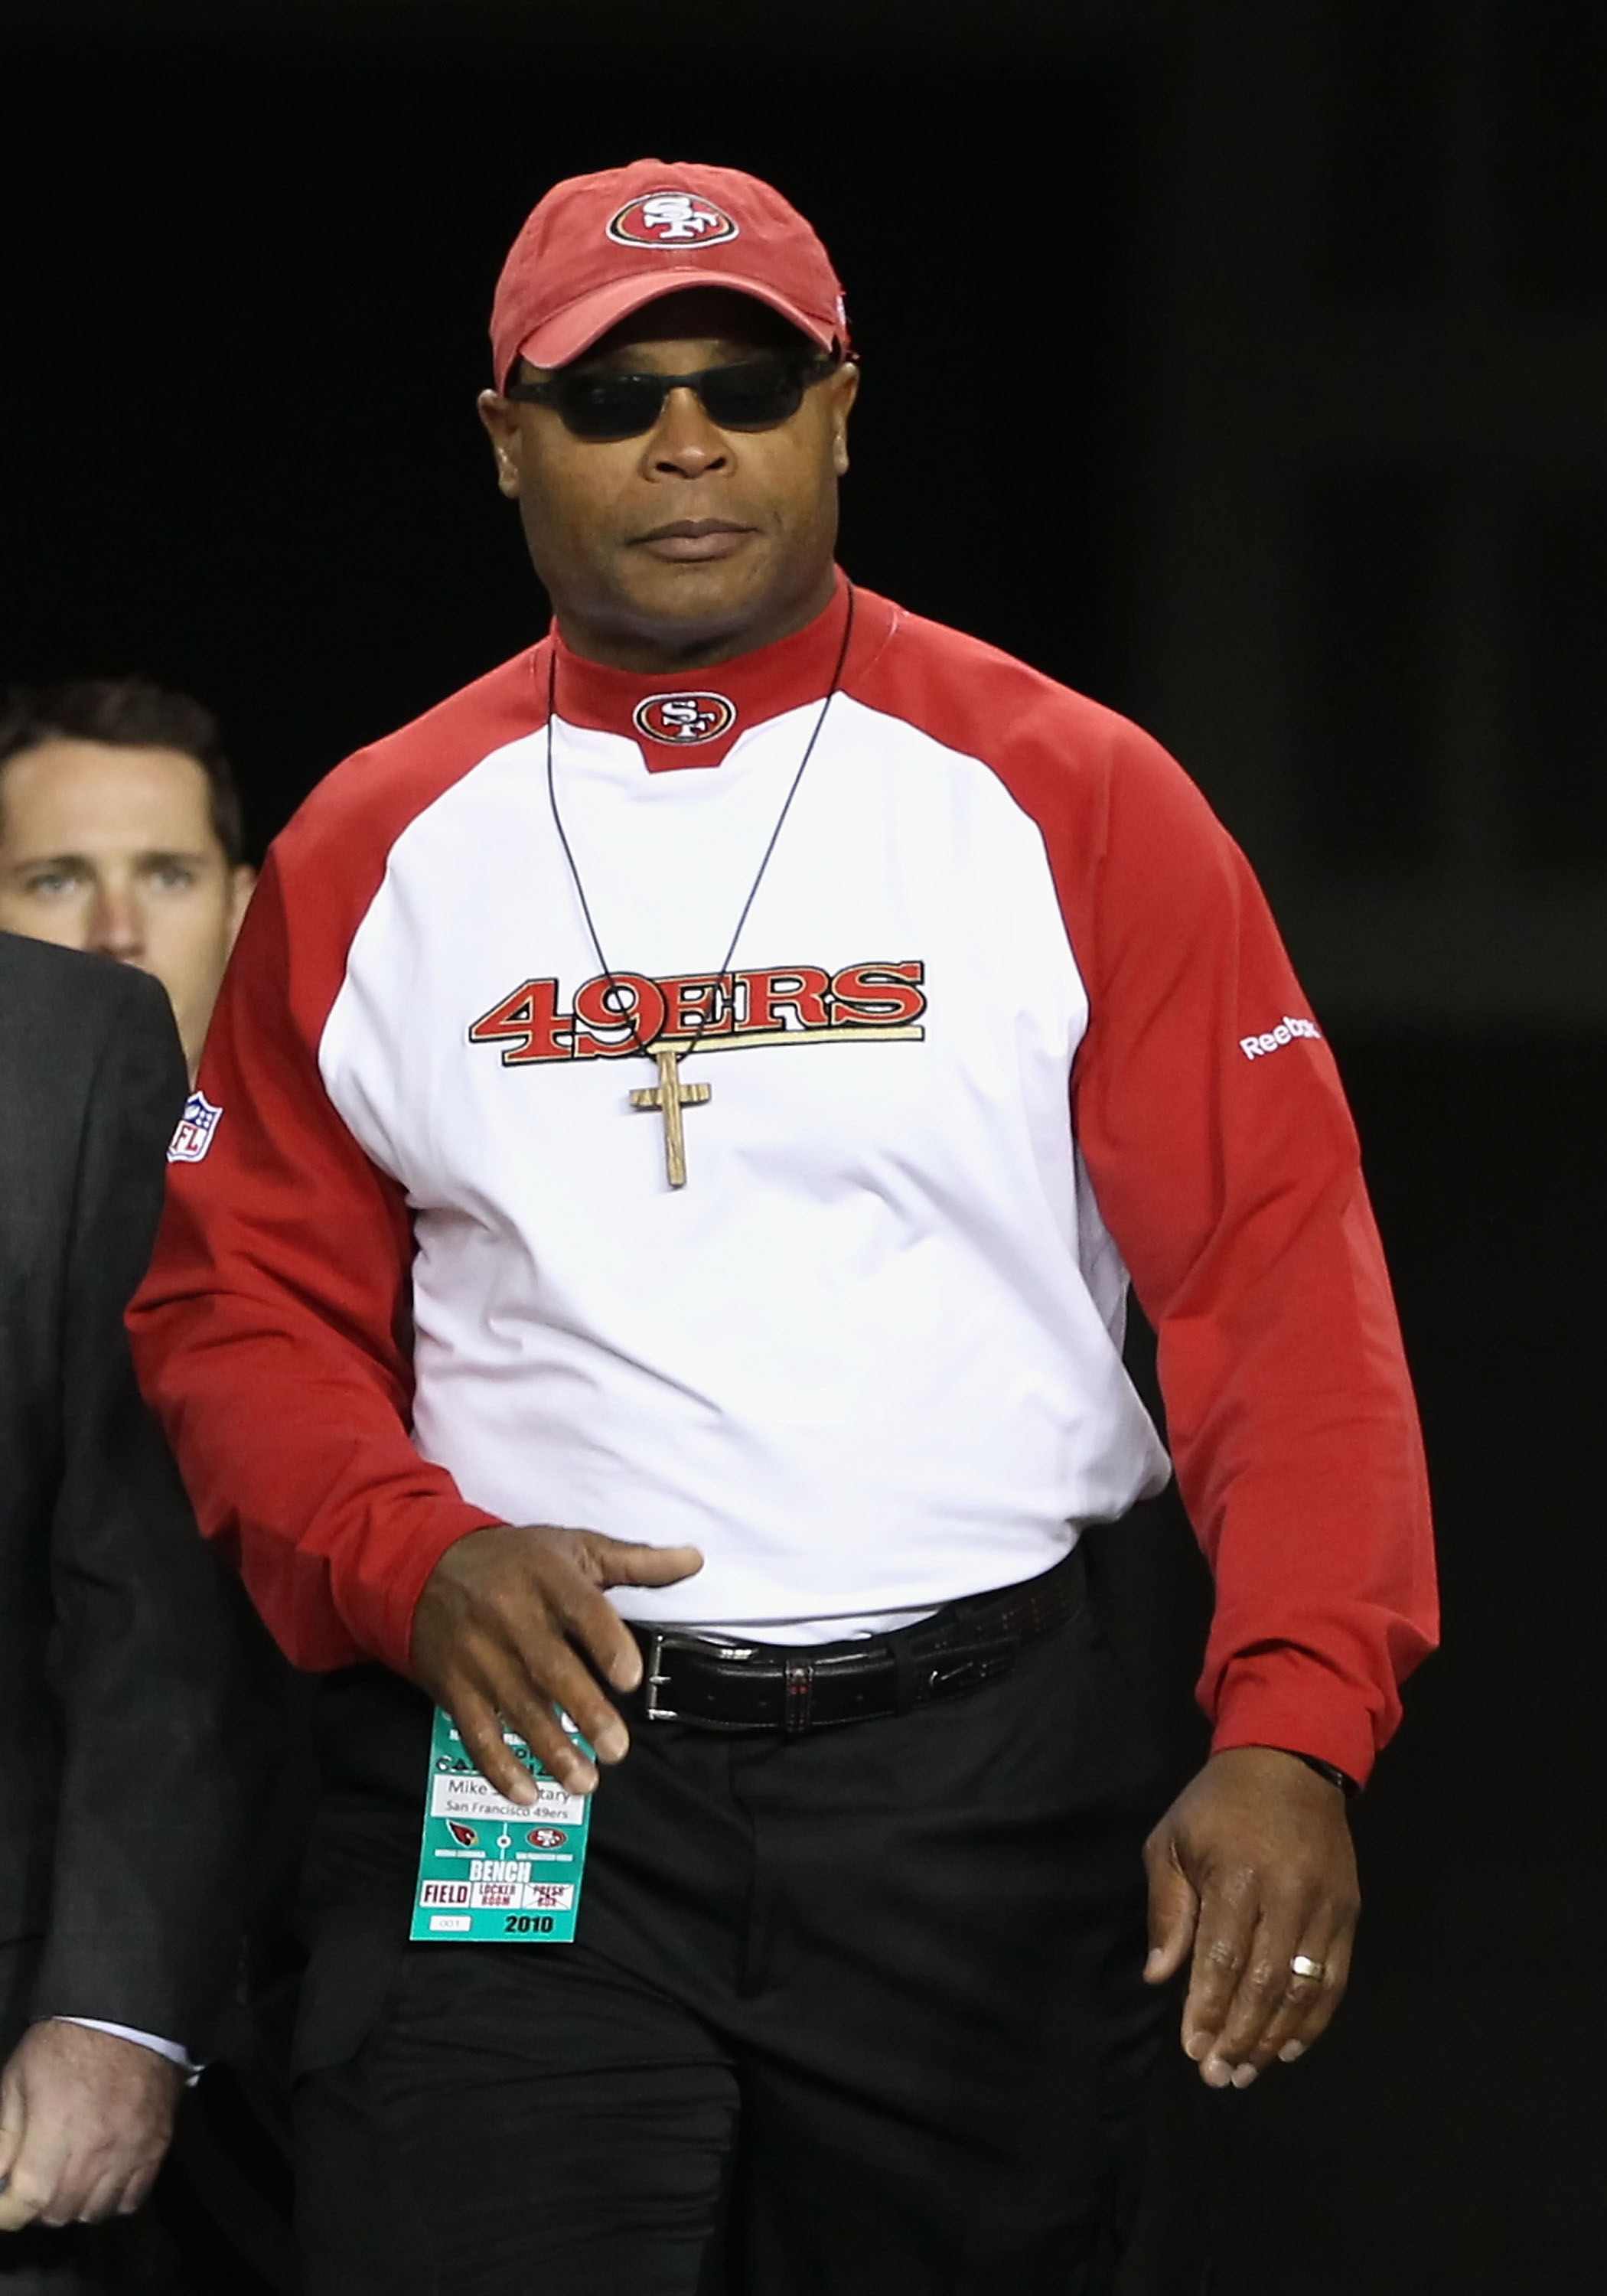 GLENDALE, AZ - NOVEMBER 29:  Head coach Mike Singletary of the San Francisco 49ers walks onto the field before the NFL game against the Arizona Cardinals at the University of Phoenix Stadium on November 29, 2010 in Glendale, Arizona. The 49ers defeated th